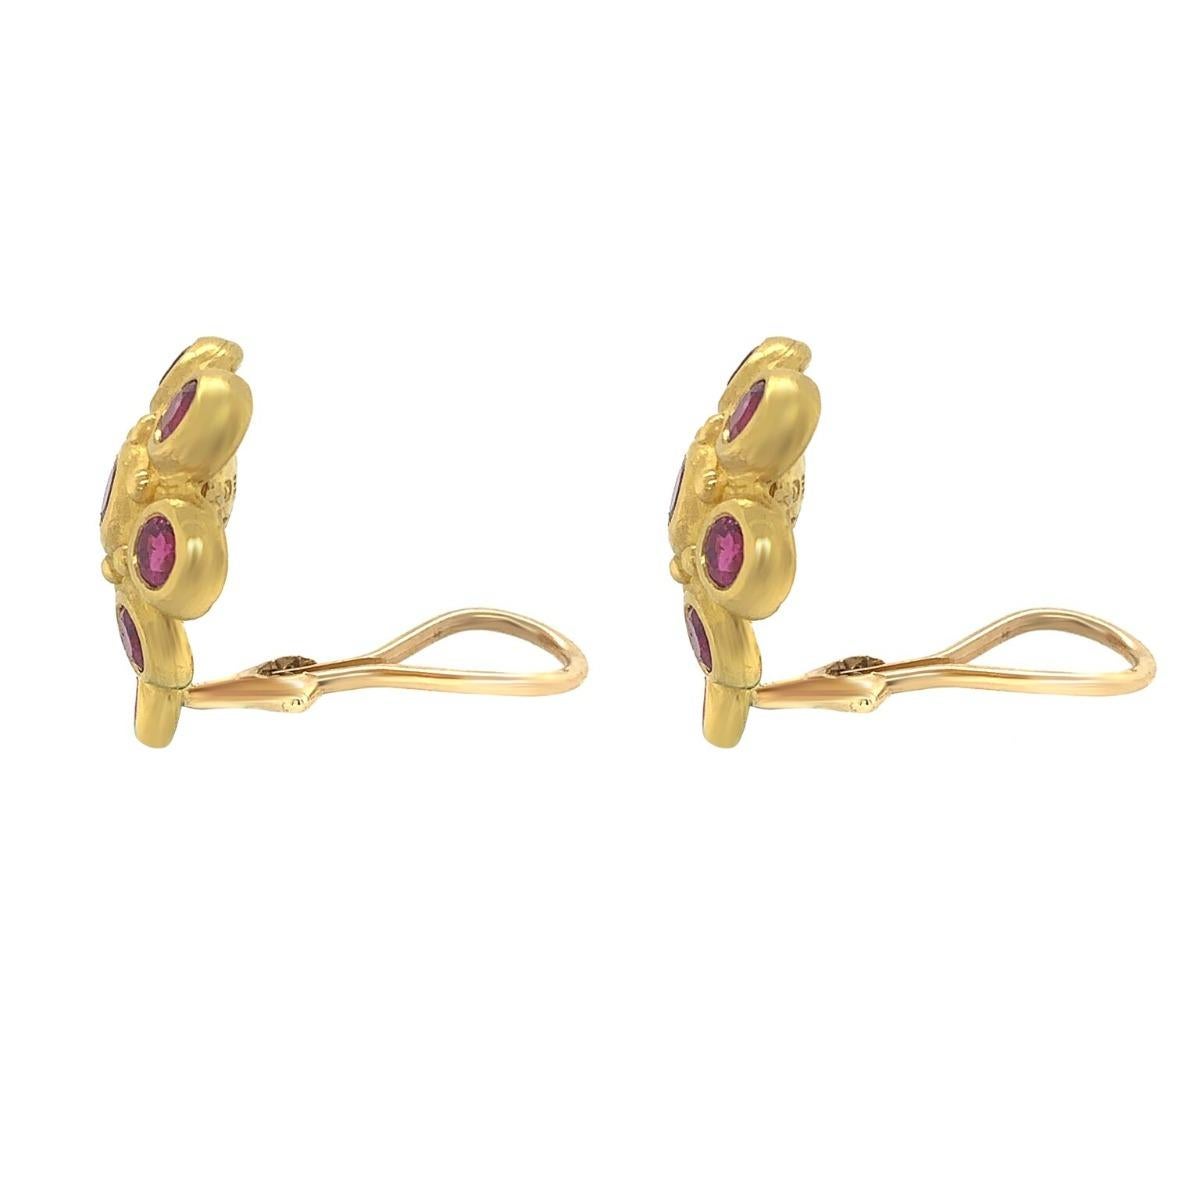 Roberge 22 Karat Yellow Gold and Ruby Ear Clips In Excellent Condition For Sale In New York, NY